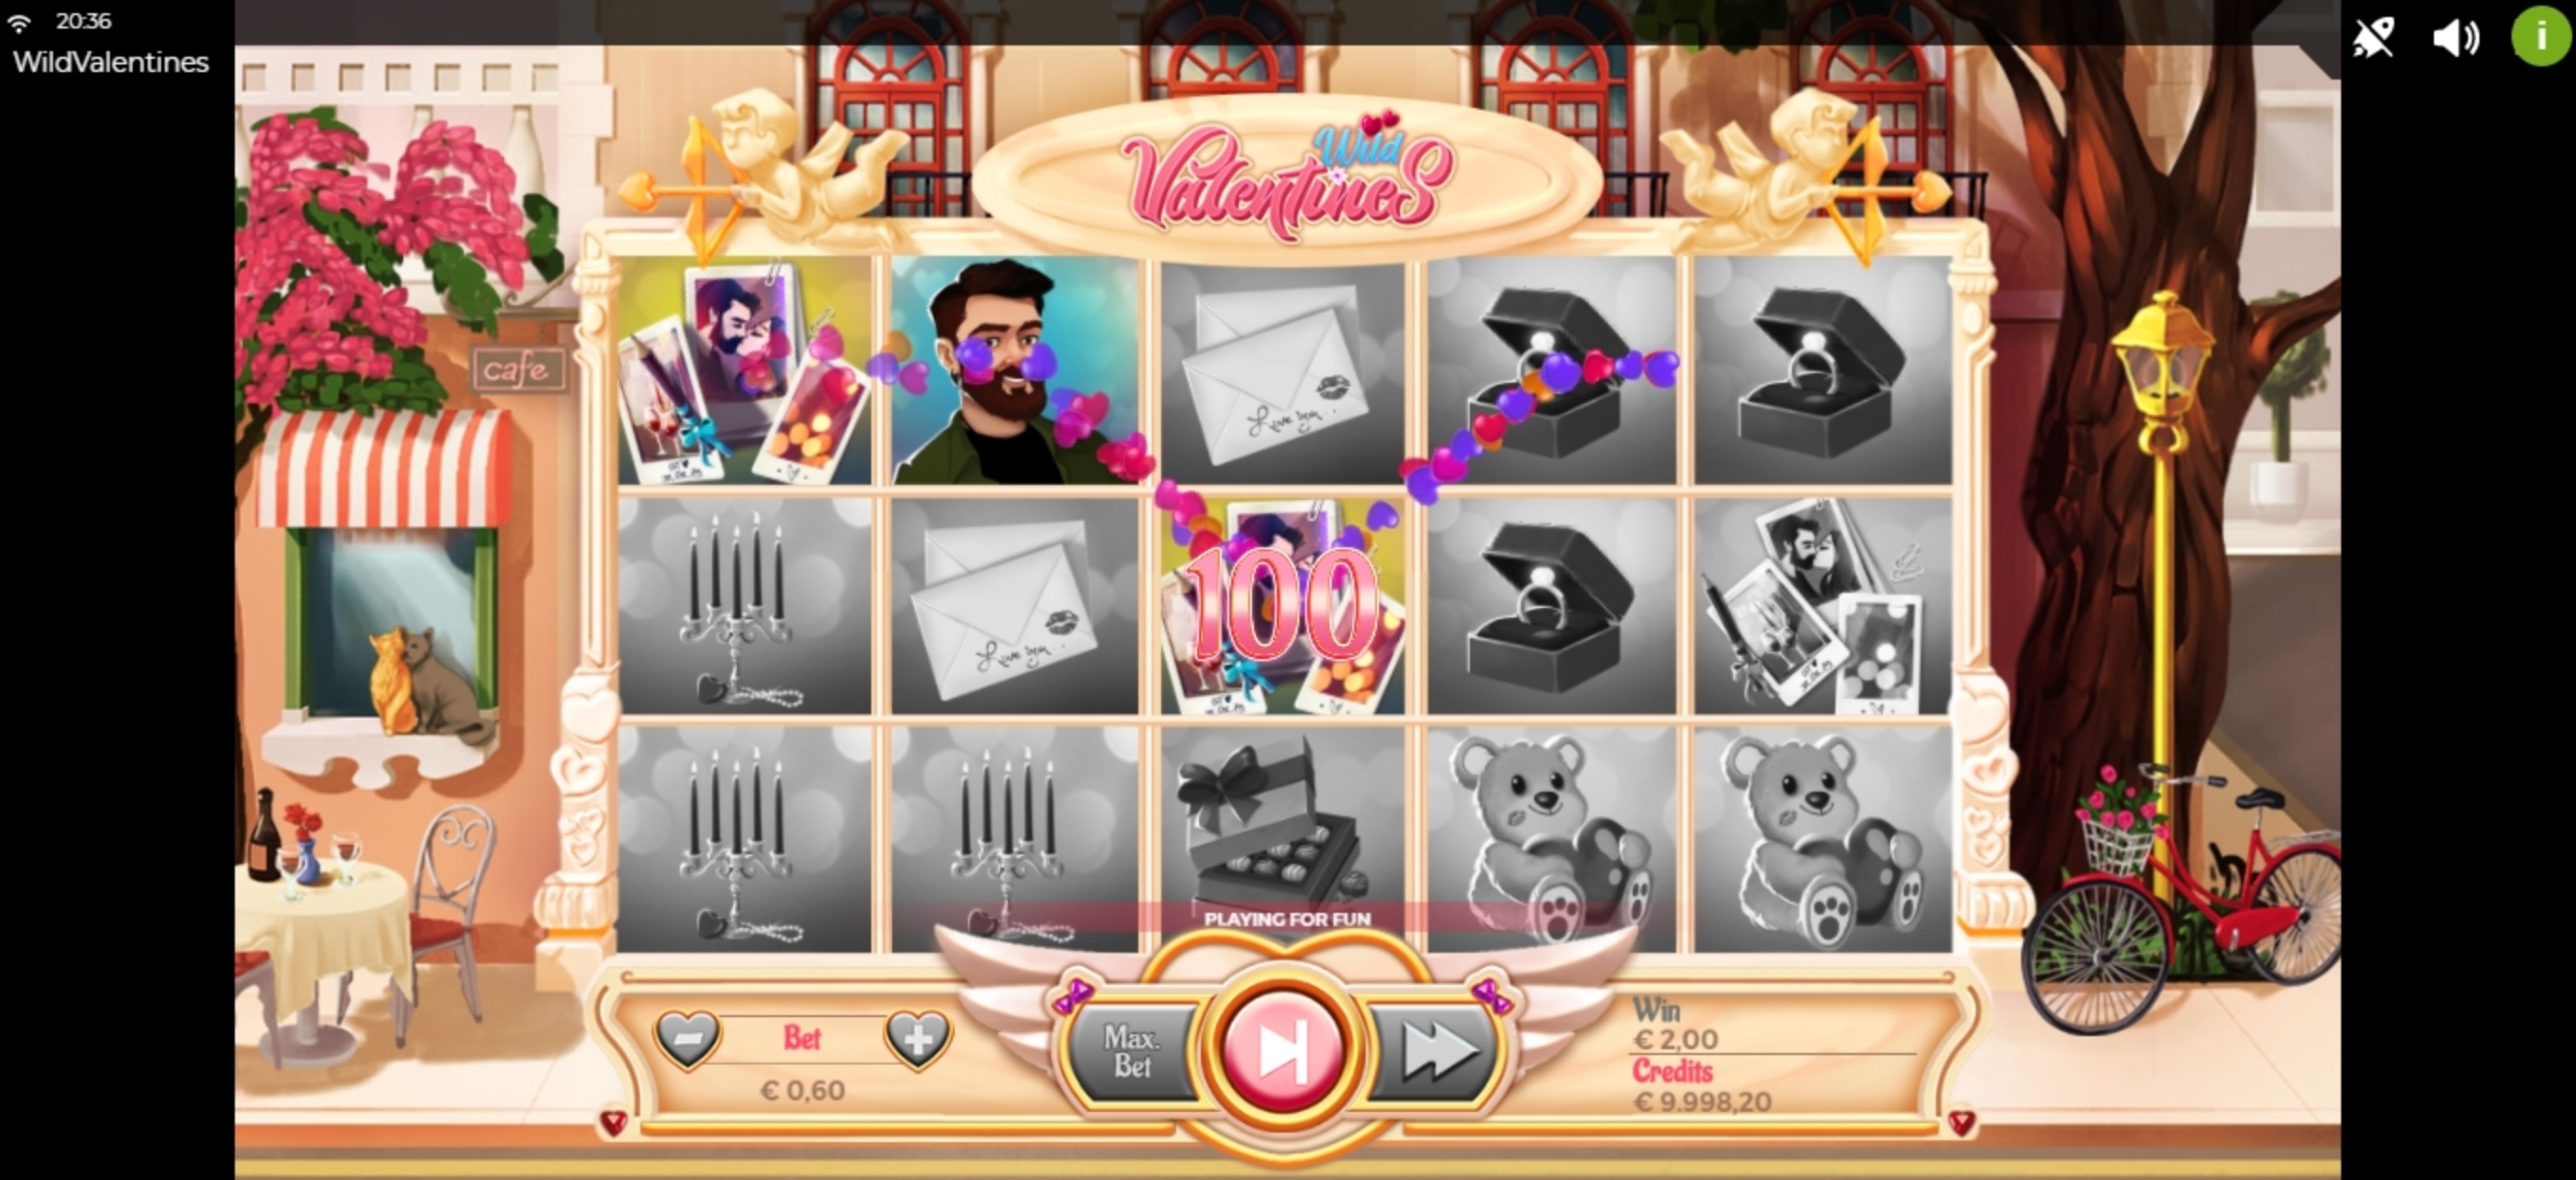 Win Money in Wild Valentines Free Slot Game by Spinmatic